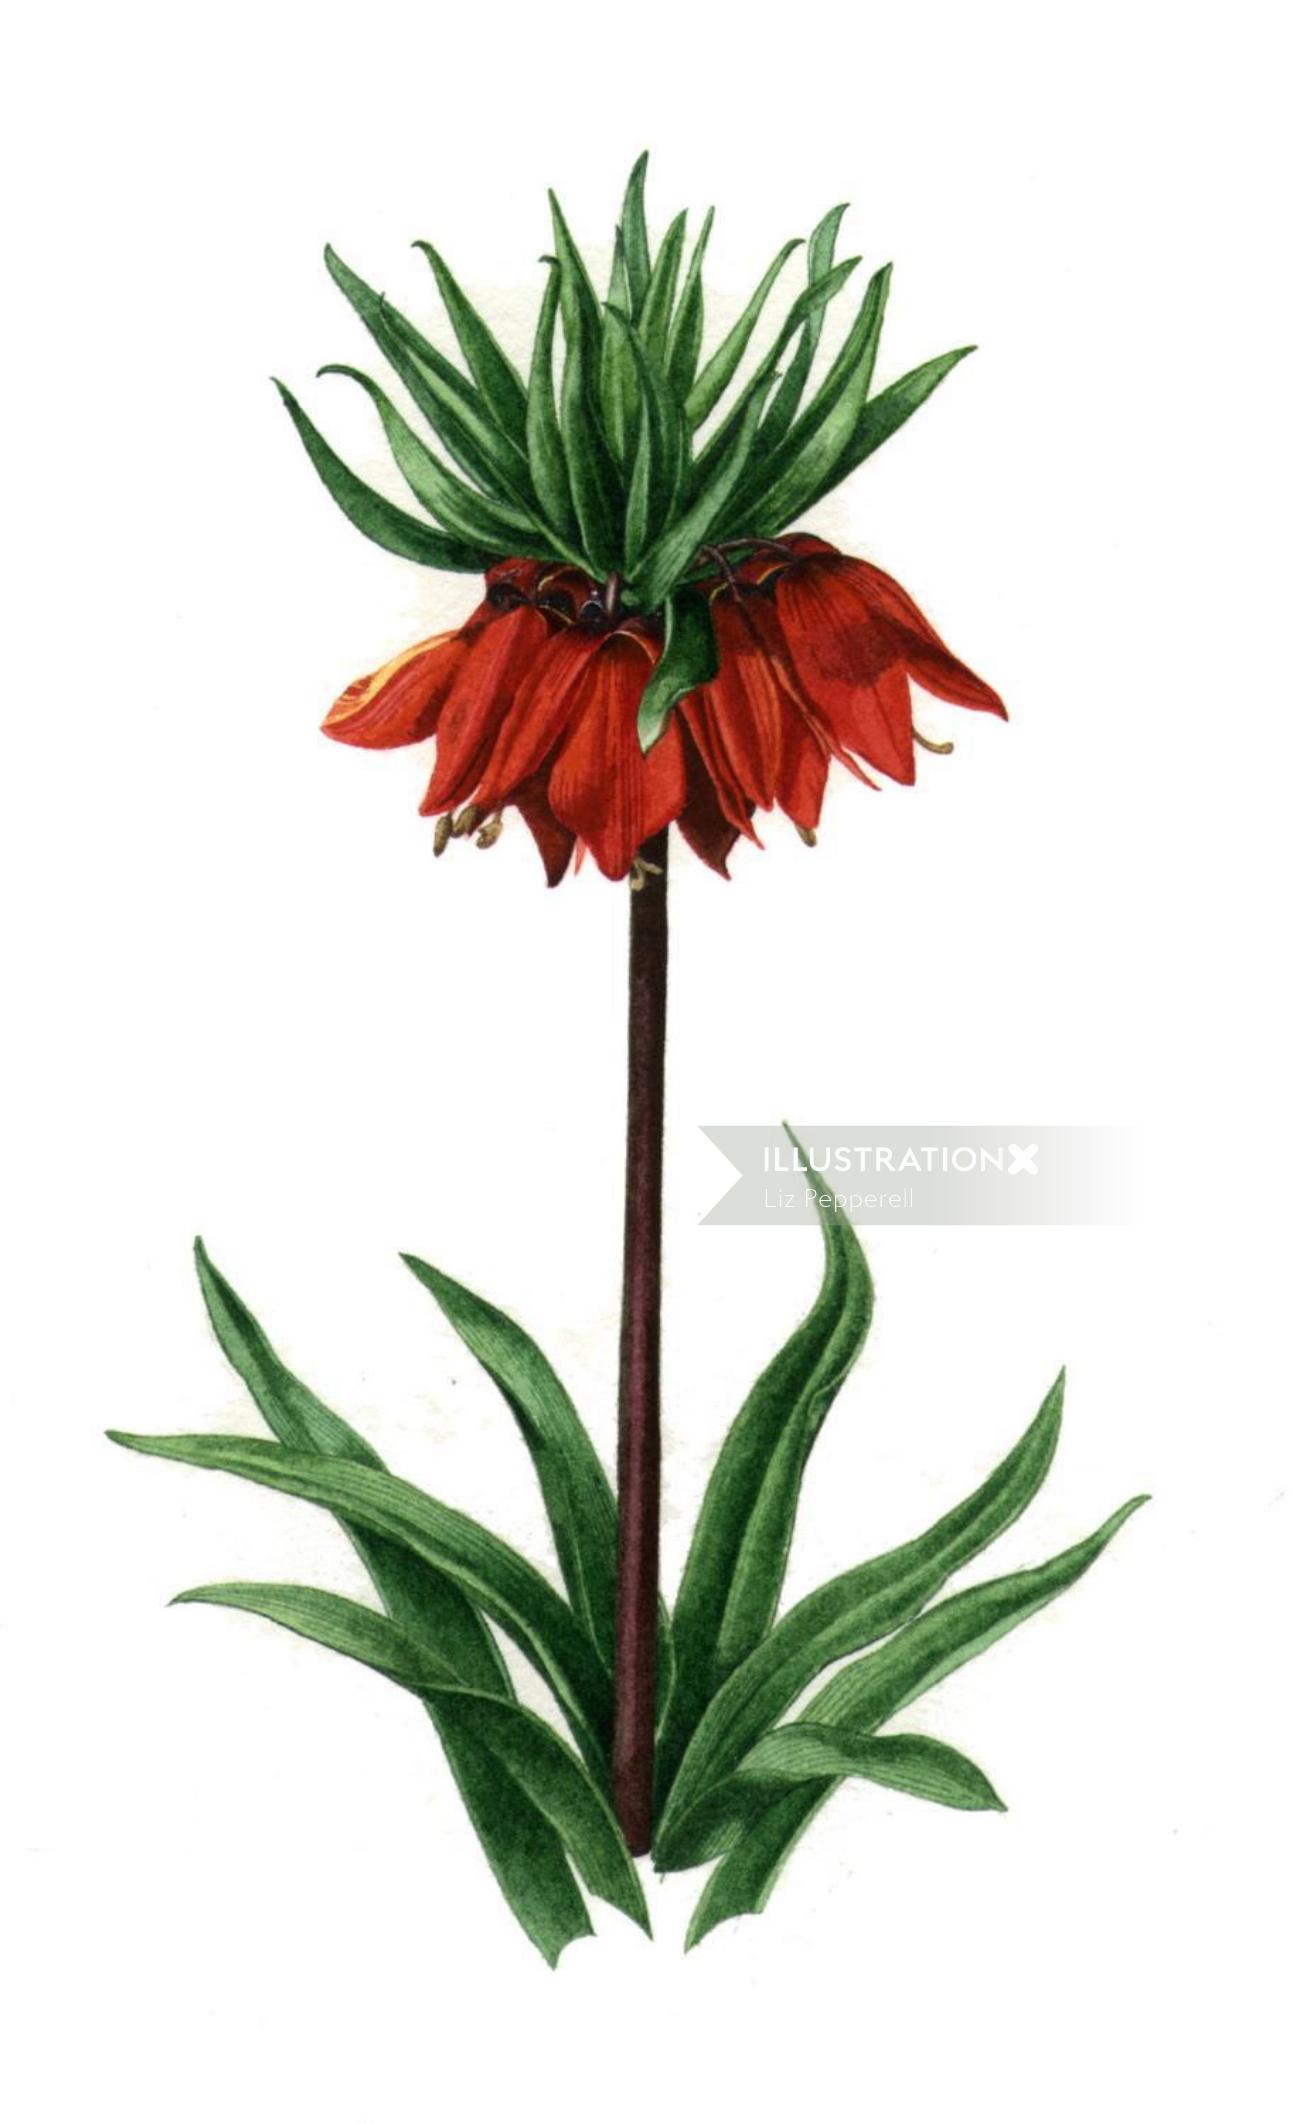 Crown imperial plants nature illustration 